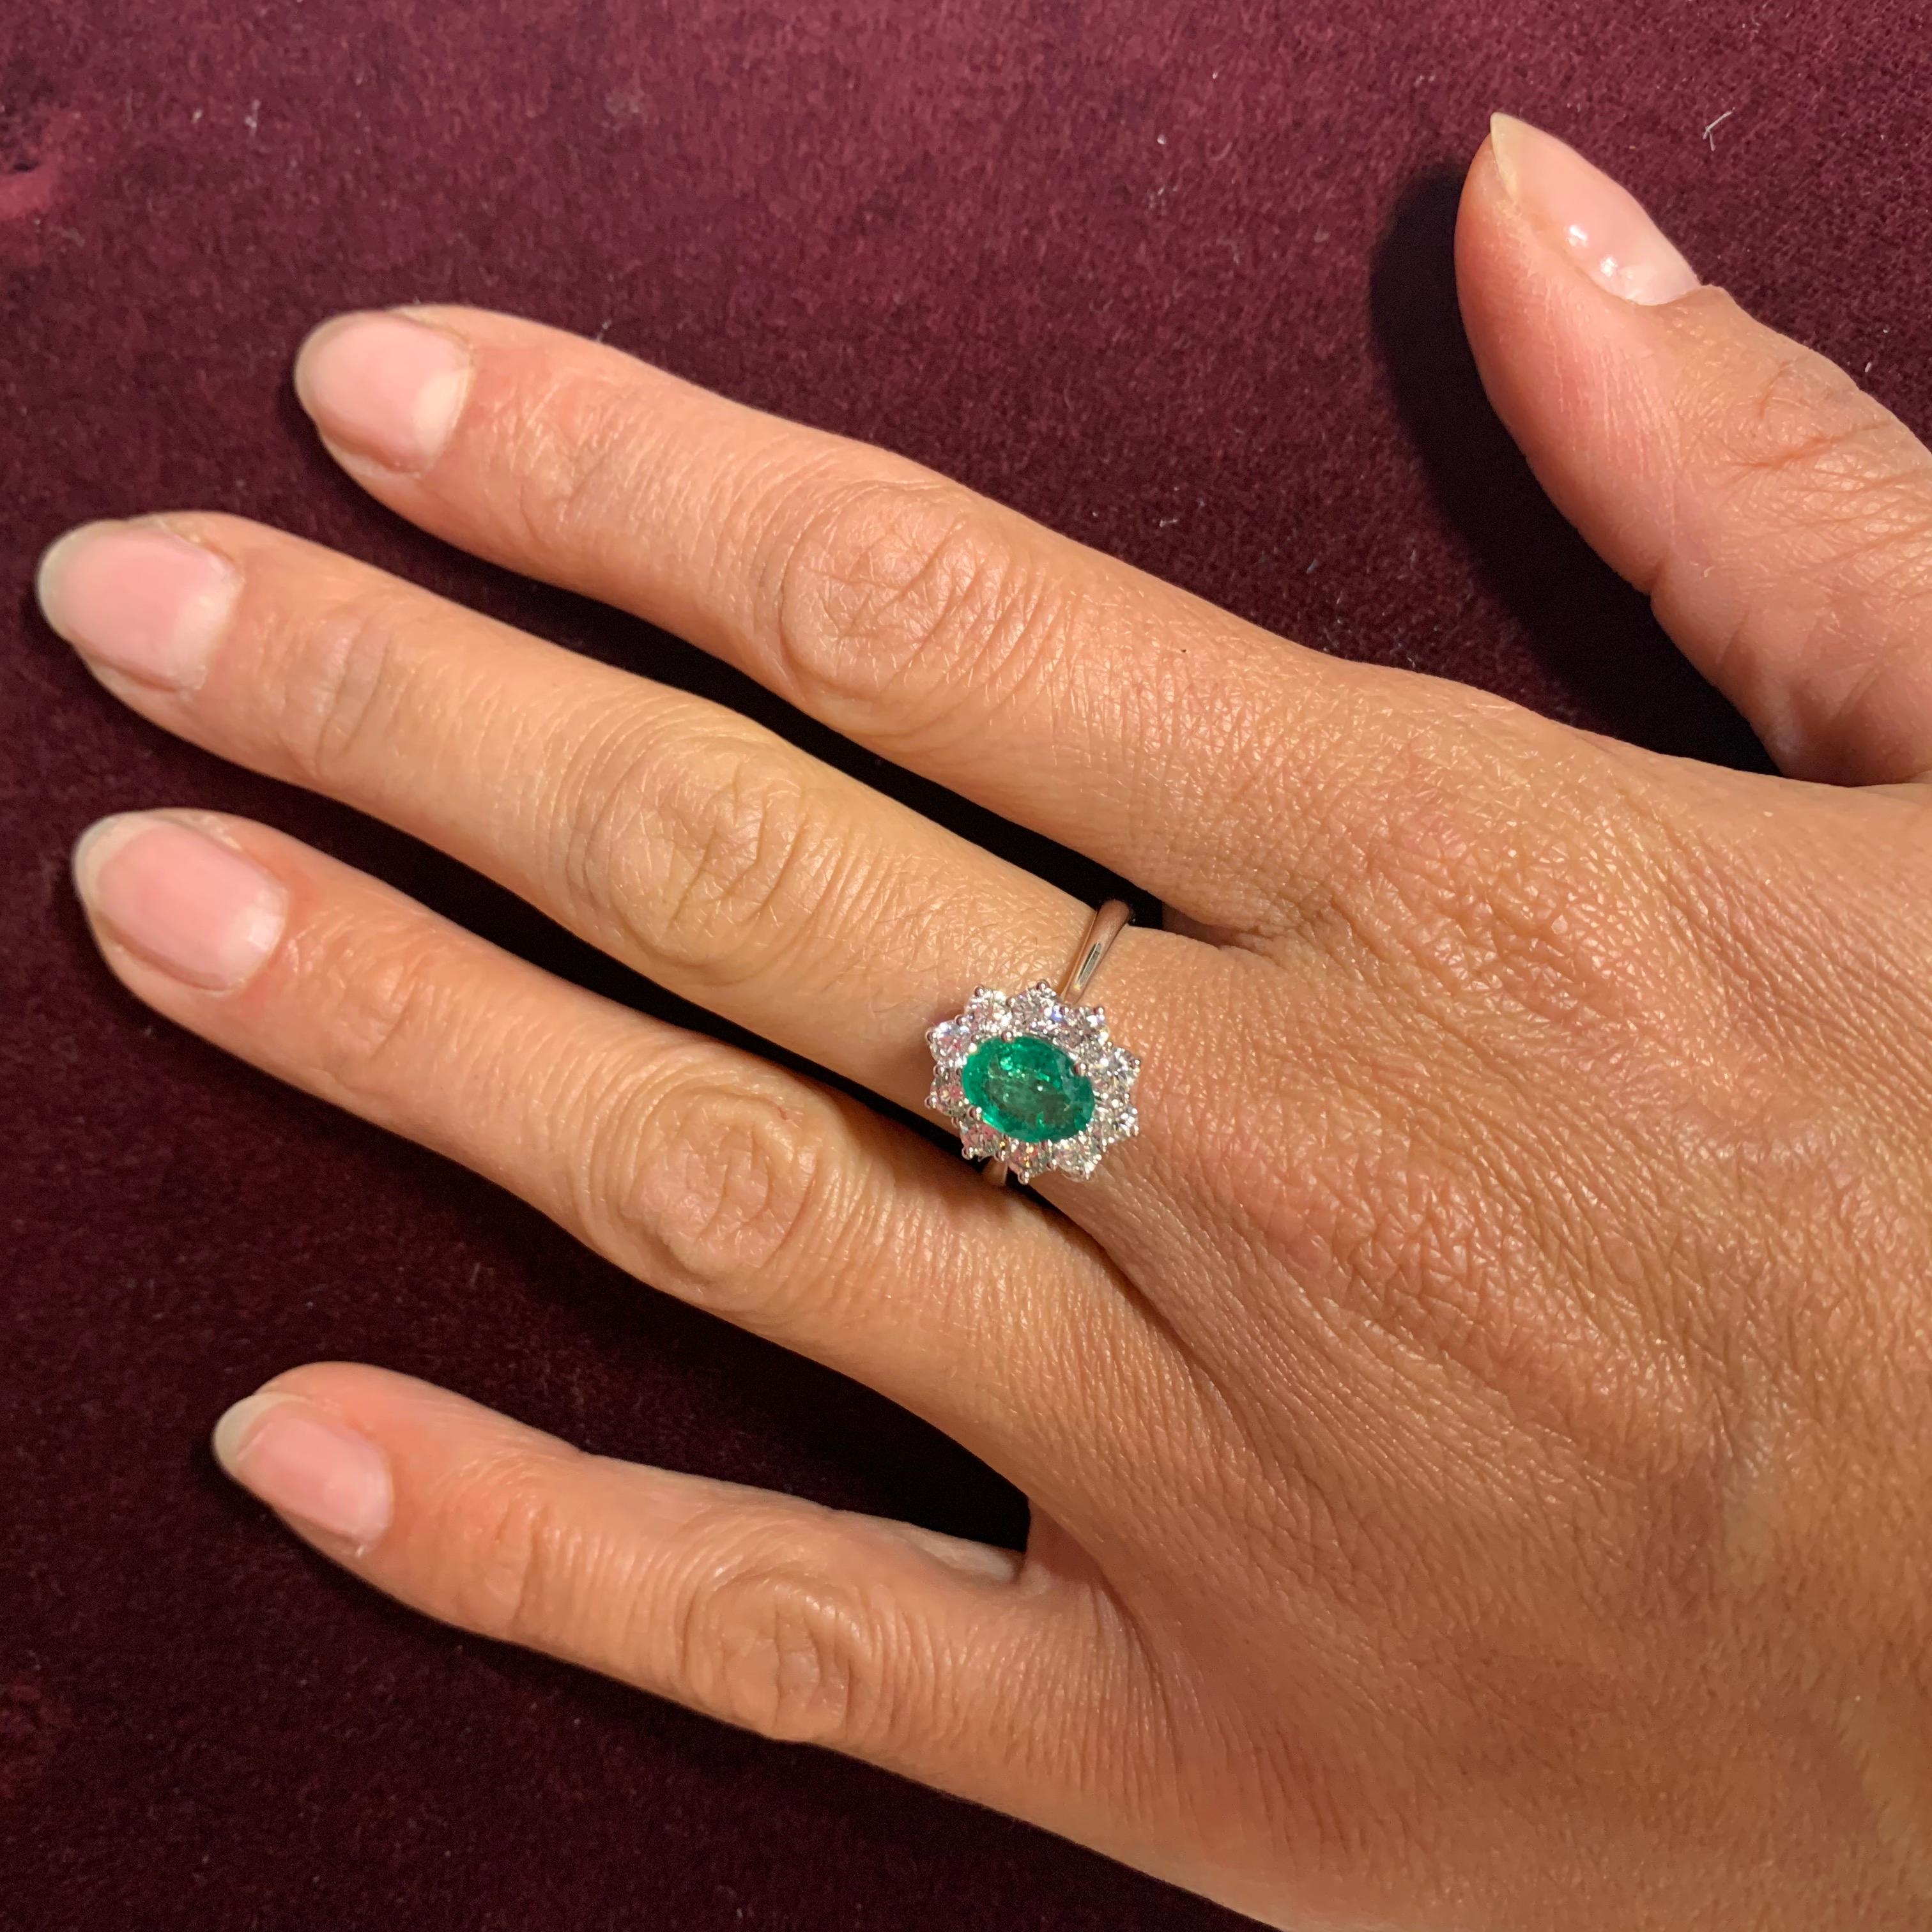 Mixed Cut 1.20 Carat Colombian Emerald & 0.81 Carat Diamonds set in 18Kt White Gold Ring